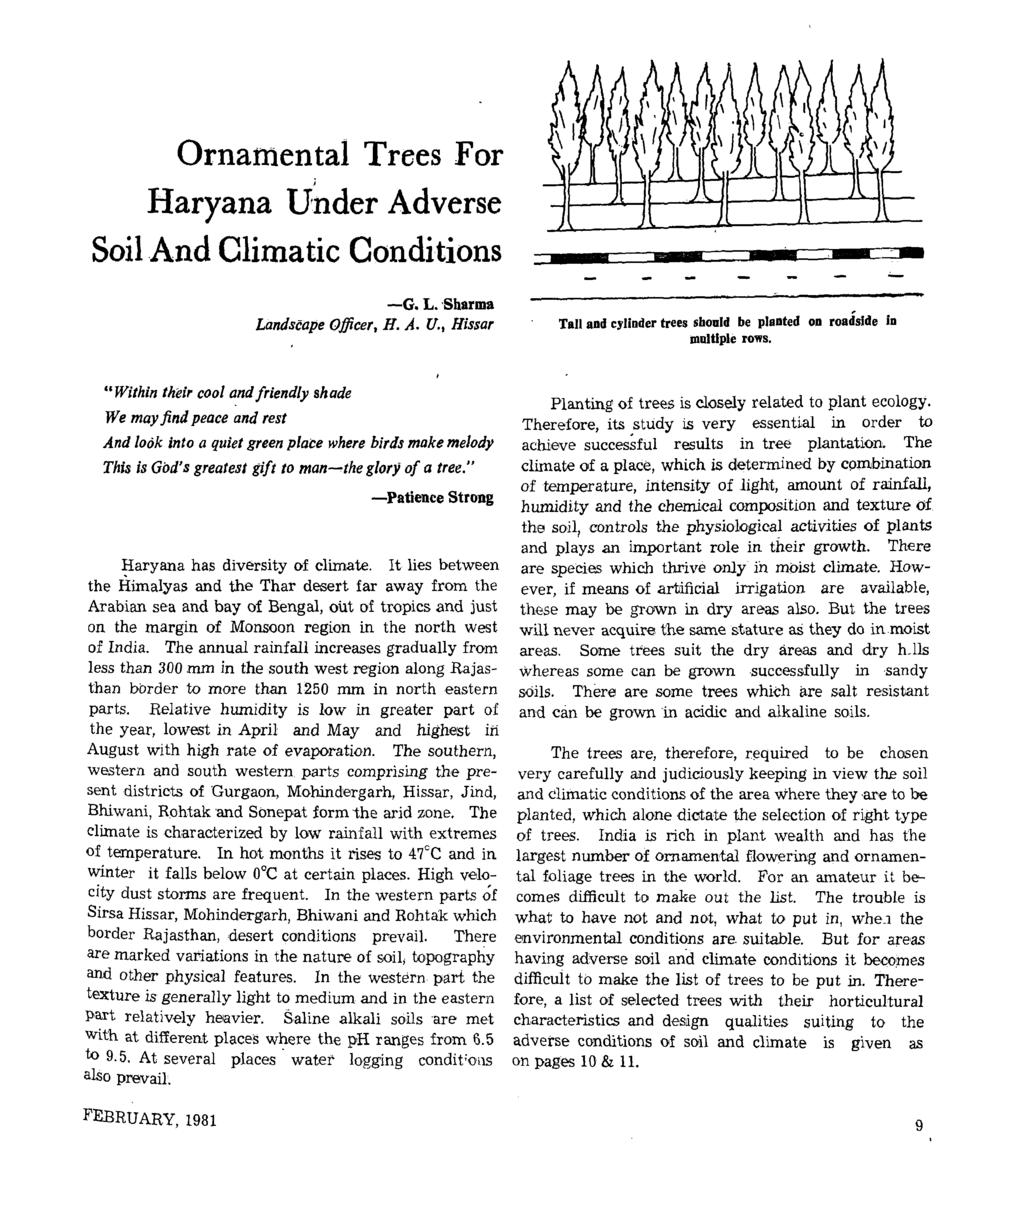 Ornamental Trees For Haryana U~der Adverse Soil And Climatic Conditions -G. L. 'Sharma Landscape Officer, H. A. U., Hissar Tall add cylinder trees should be plaoted 00 roadside in Dlultlple rows.